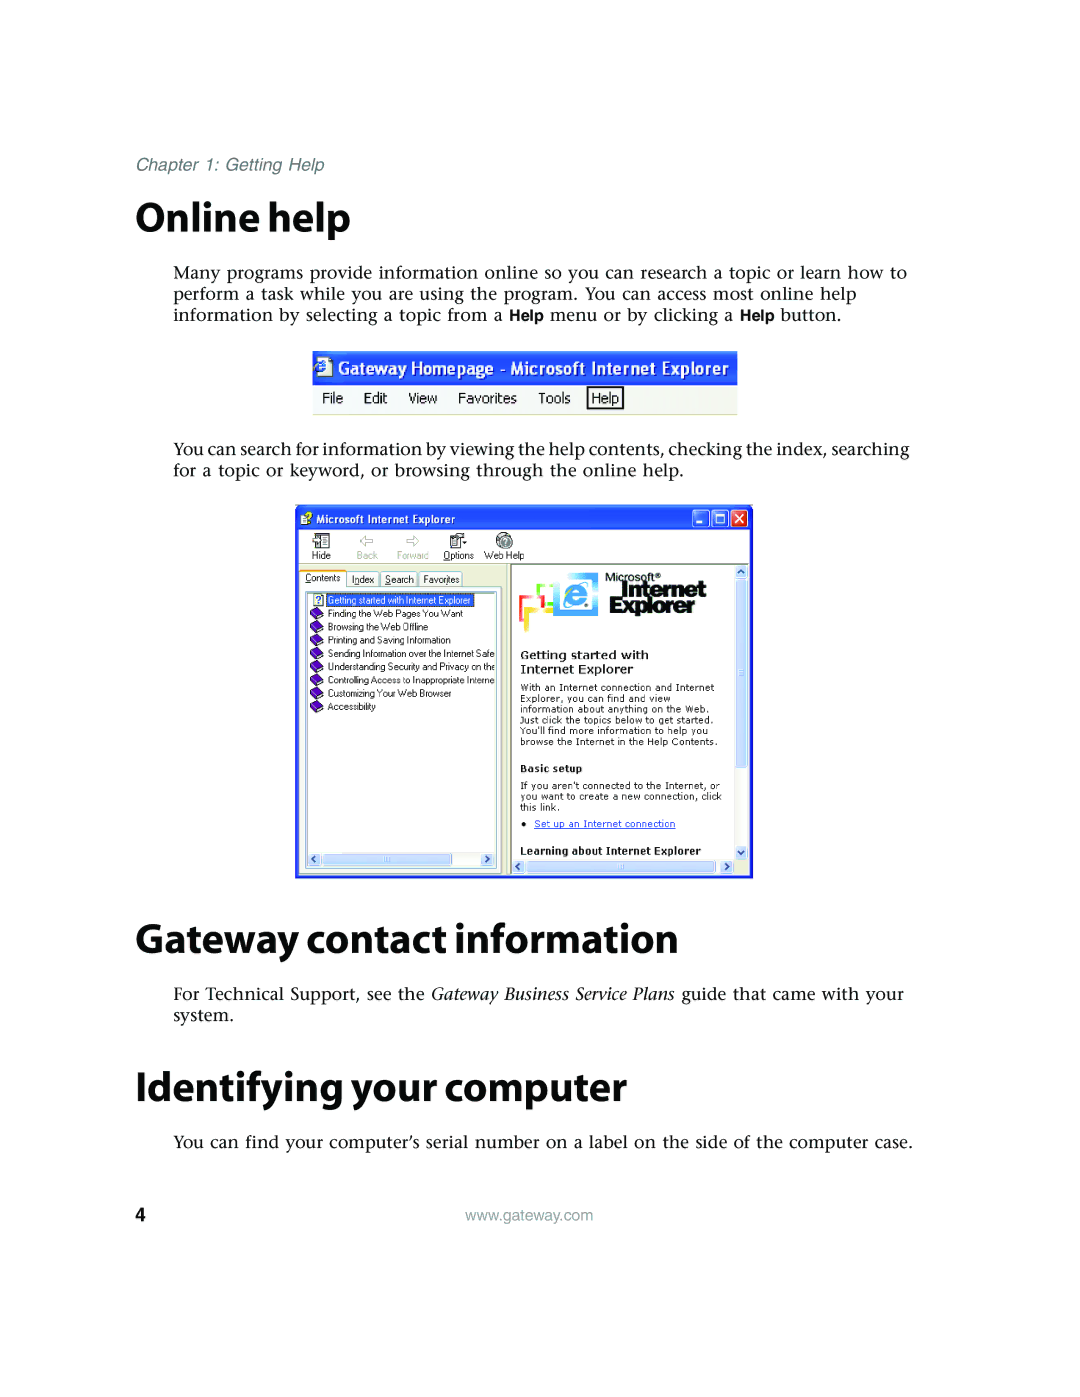 Gateway E4350 manual Online help, Gateway contact information, Identifying your computer 